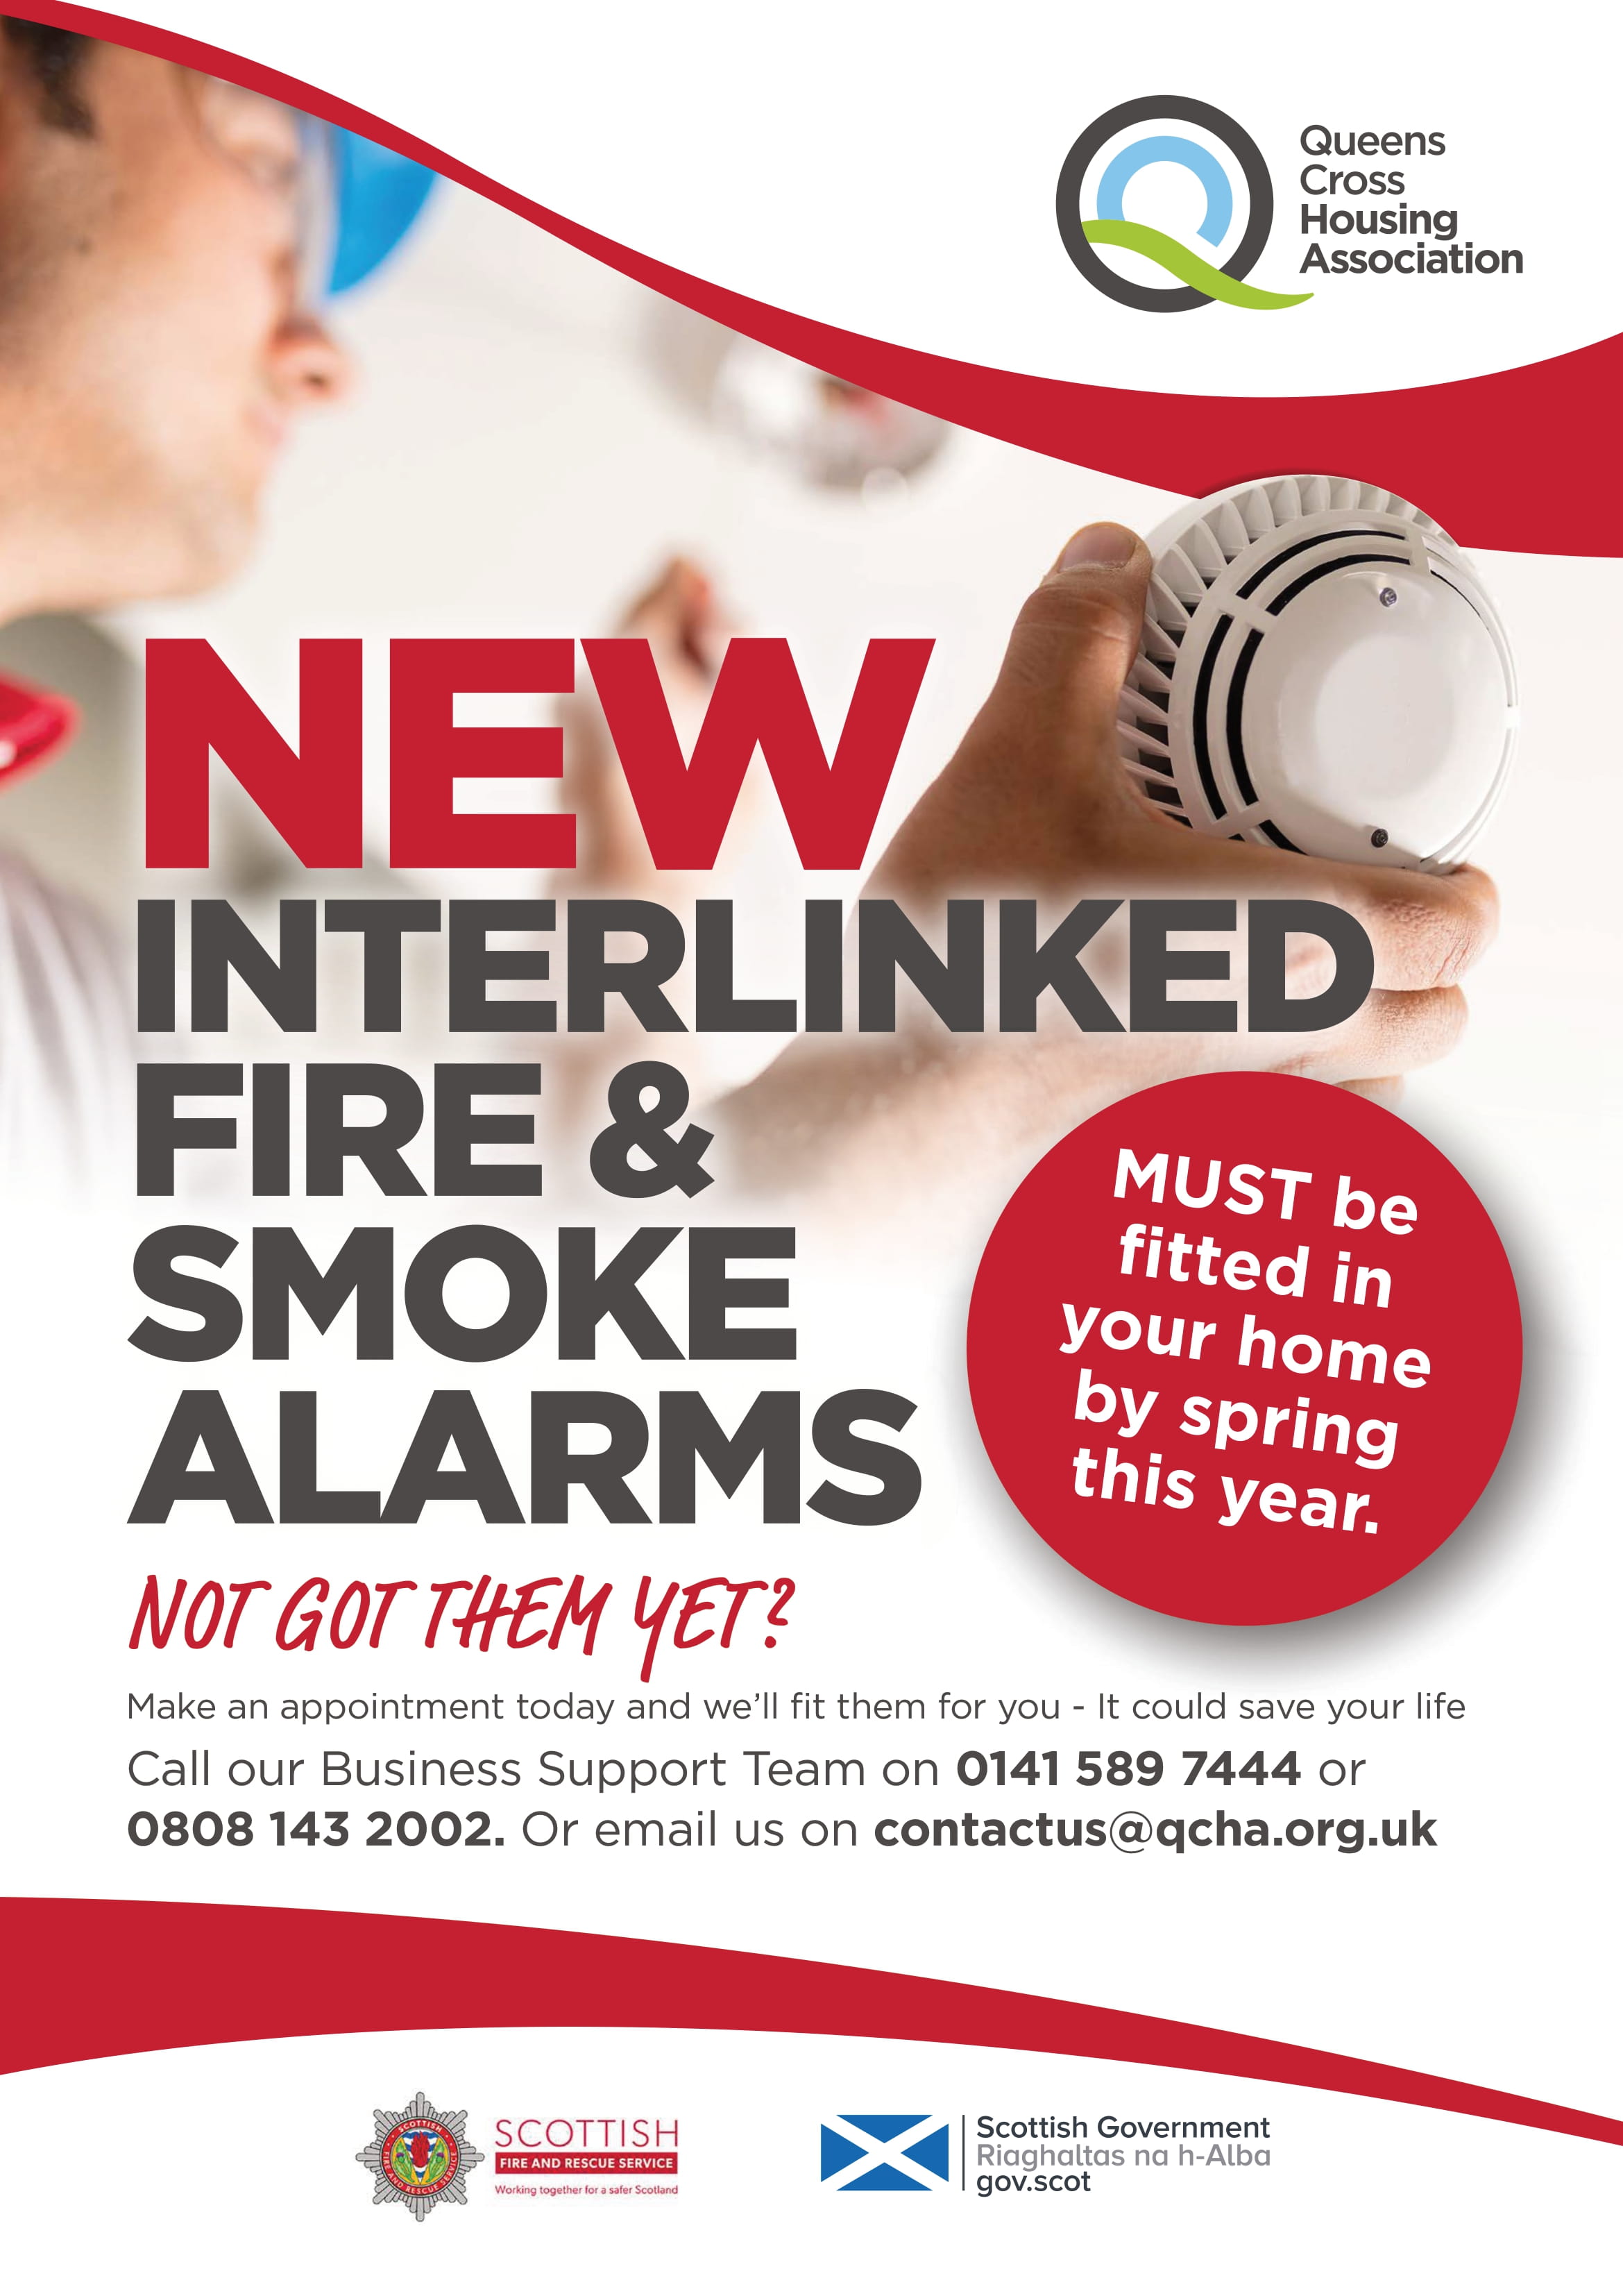 Contact us today if you need the new alarms fitted in your home.